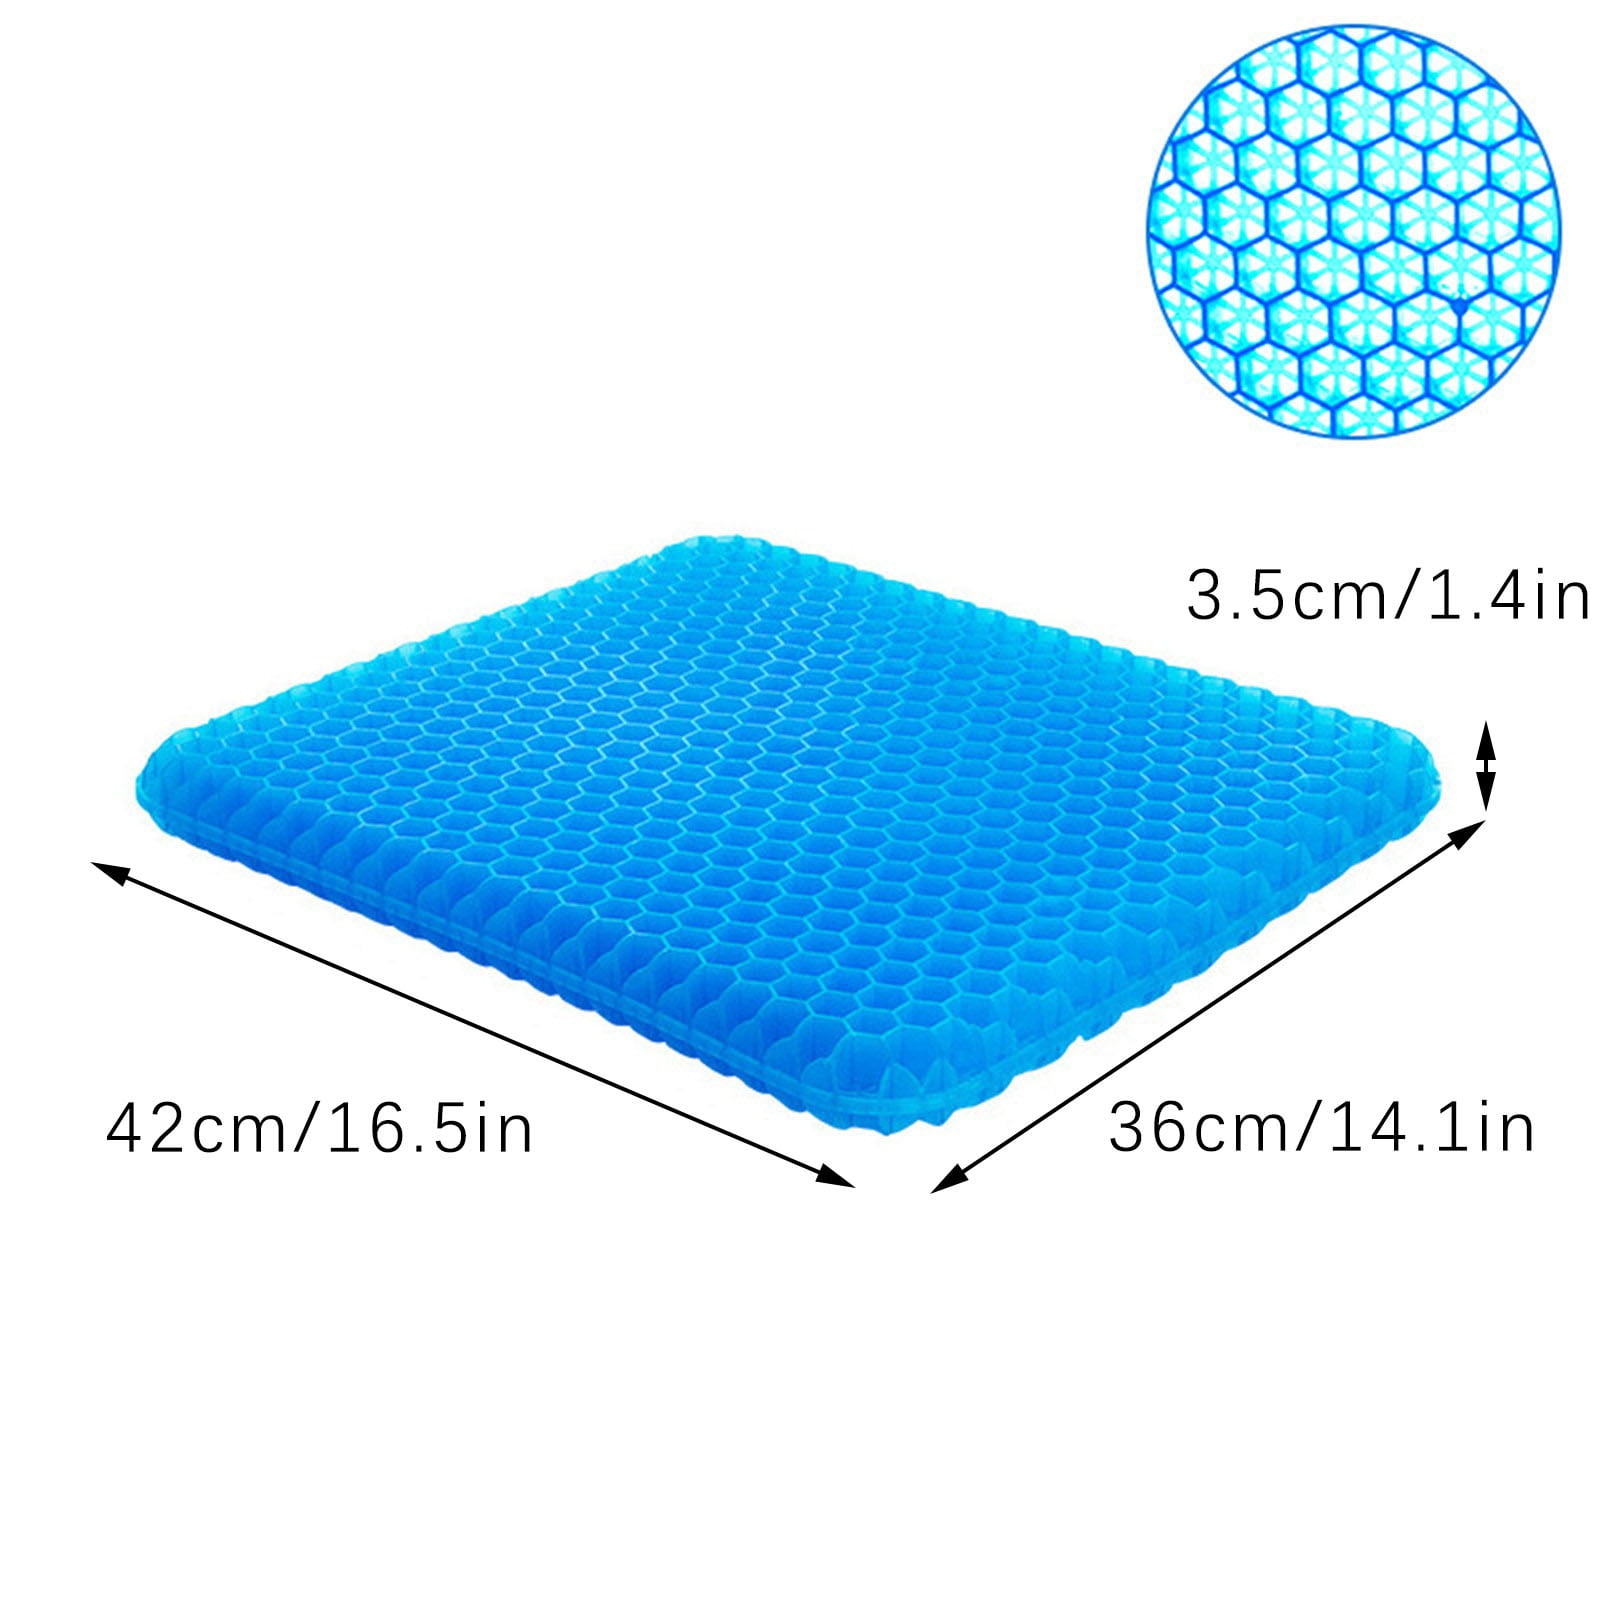 Gel Memory Foam Seat Cushion with Chair Ties - Orthopedic Seat Pad for  Office, Car, Truck, and Wheelchair - Cooling Comfort, Portable, Pressure  Relief